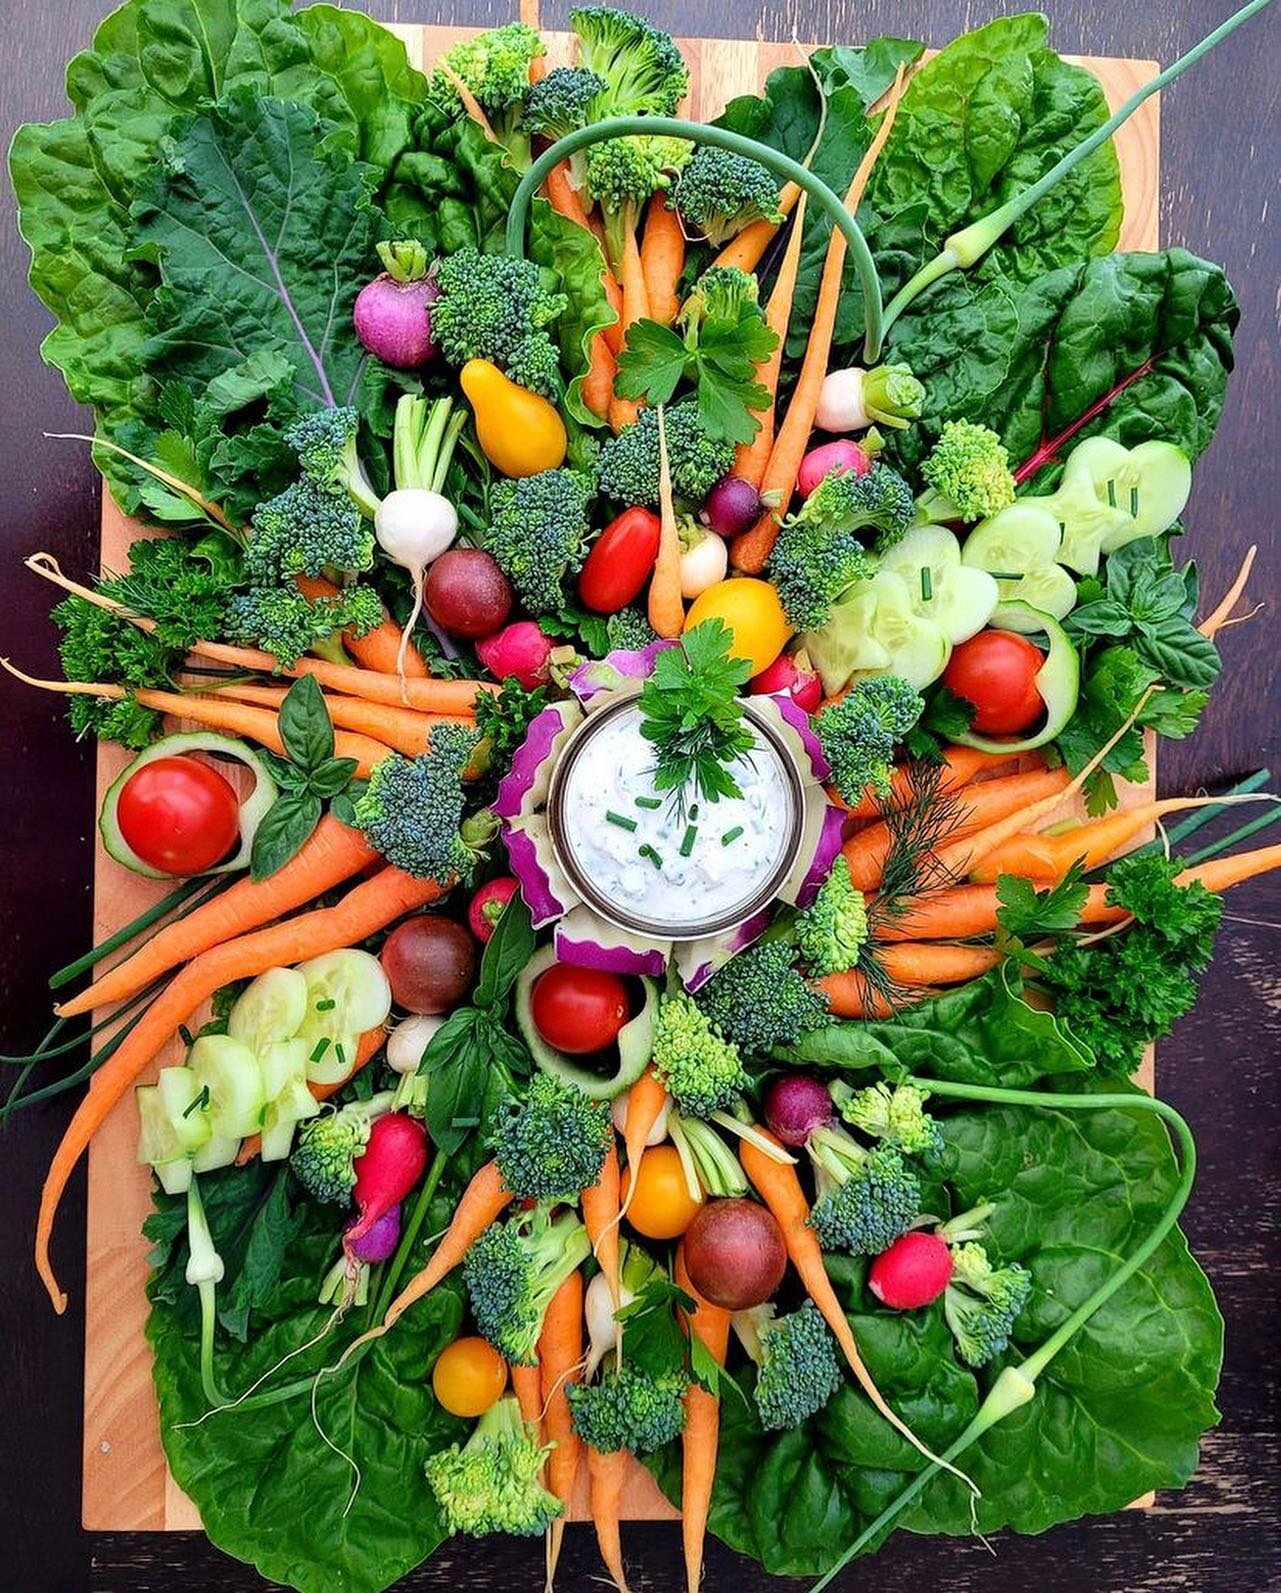 Eat the rainbow 🌈 

Check out this stunning grazing board created by @urfoodstoryhost featuring in-season produce from our local VFM farmers! 

Find the board details &amp; Herb Dip recipe on the @tourism_vernon blog. 
.
Board Spread Details:
@zelan